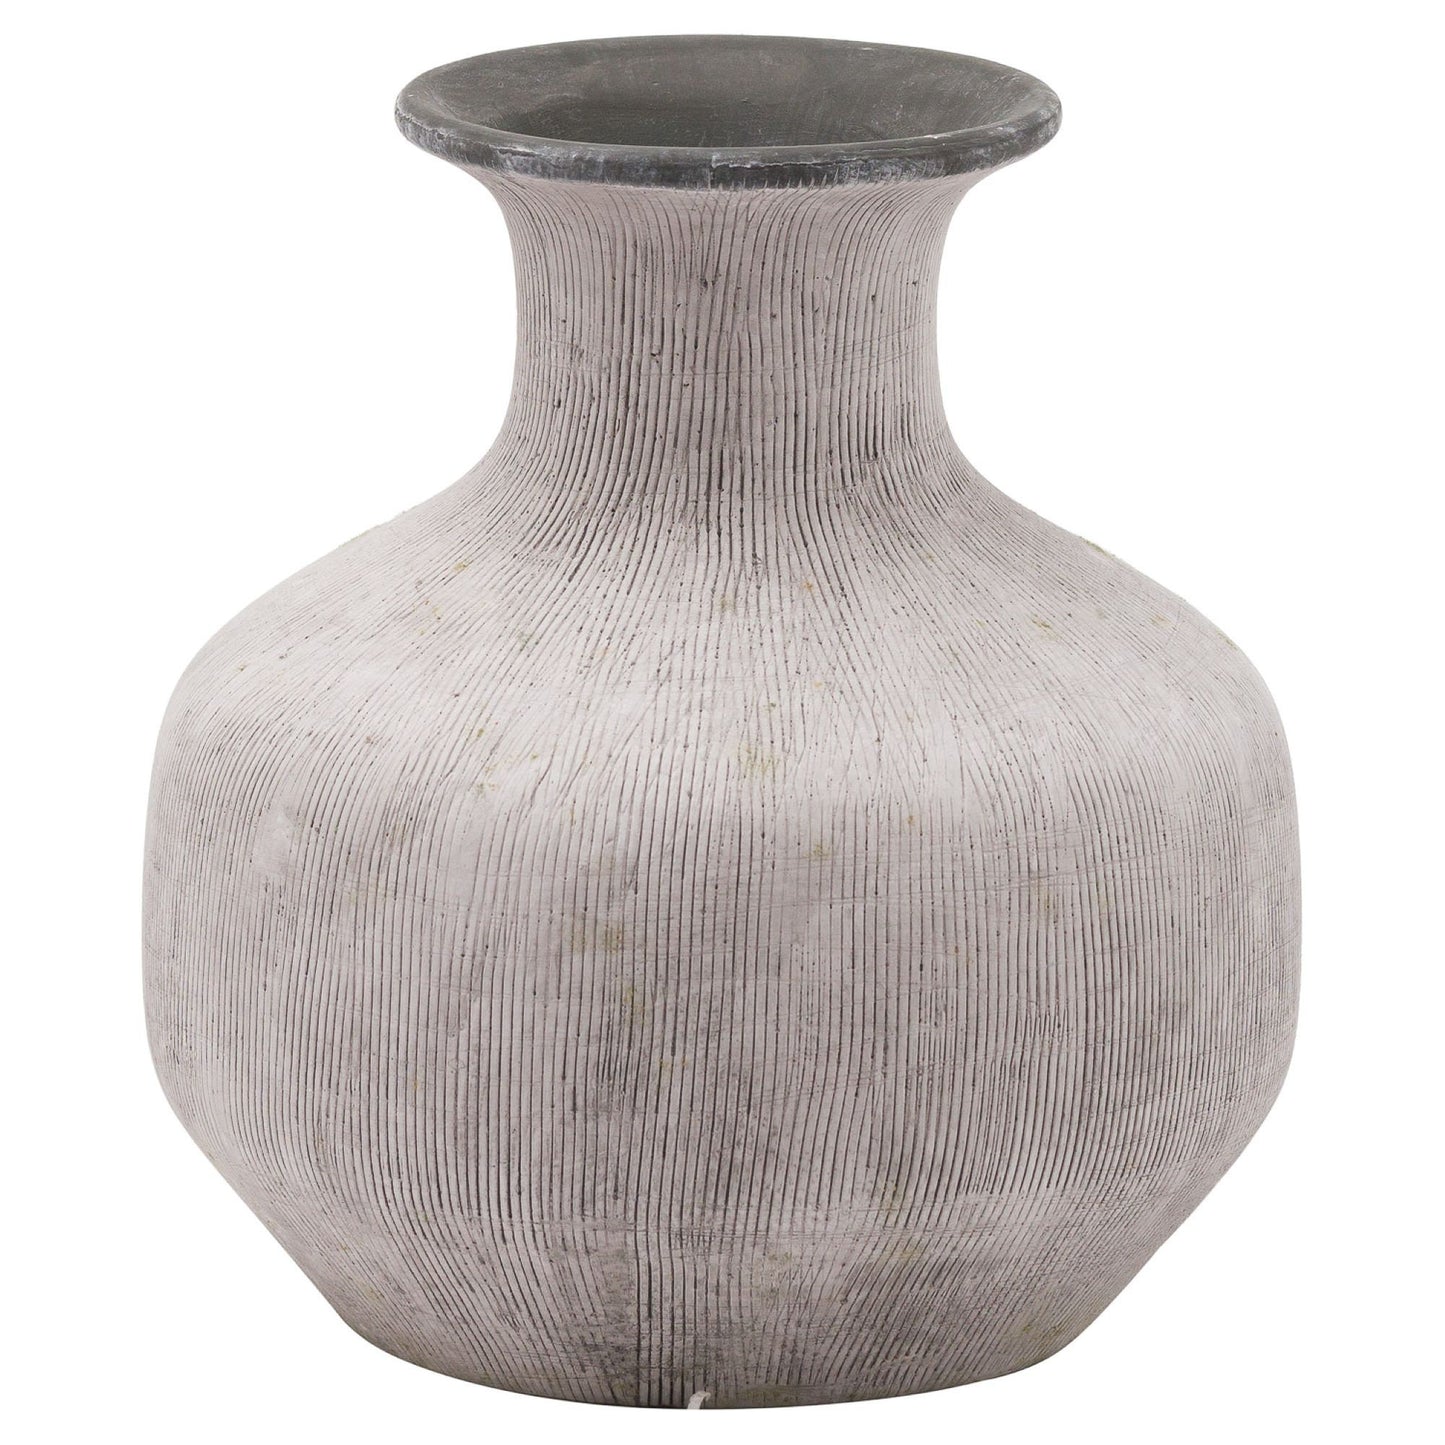 Stone Vase - Different sizes and shapes